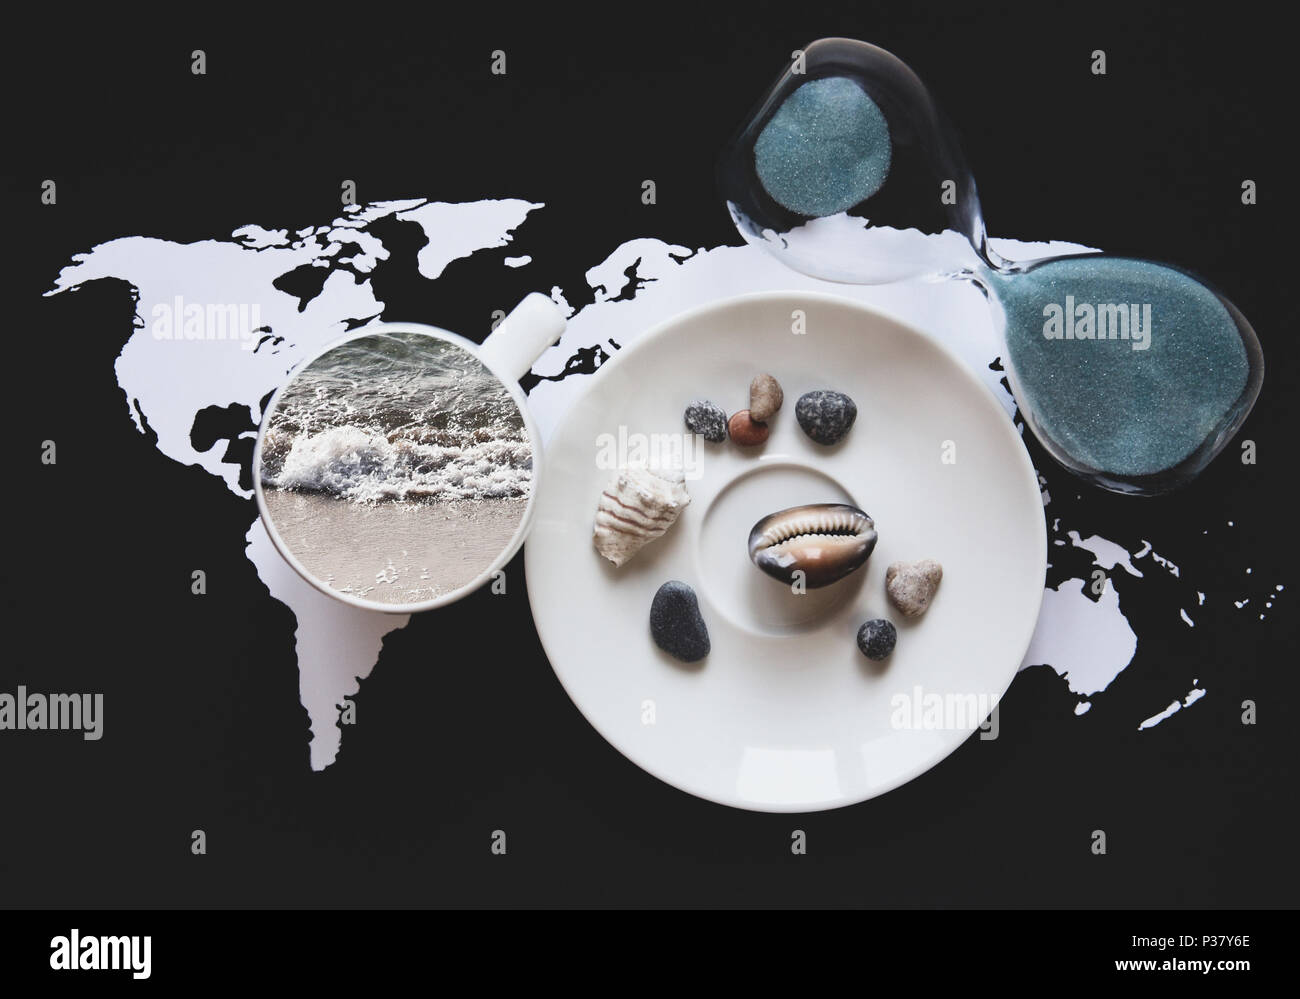 Collage in retro style, planning vacation/ world map, sandglass, cup with the sea inside and saucer with shells Stock Photo